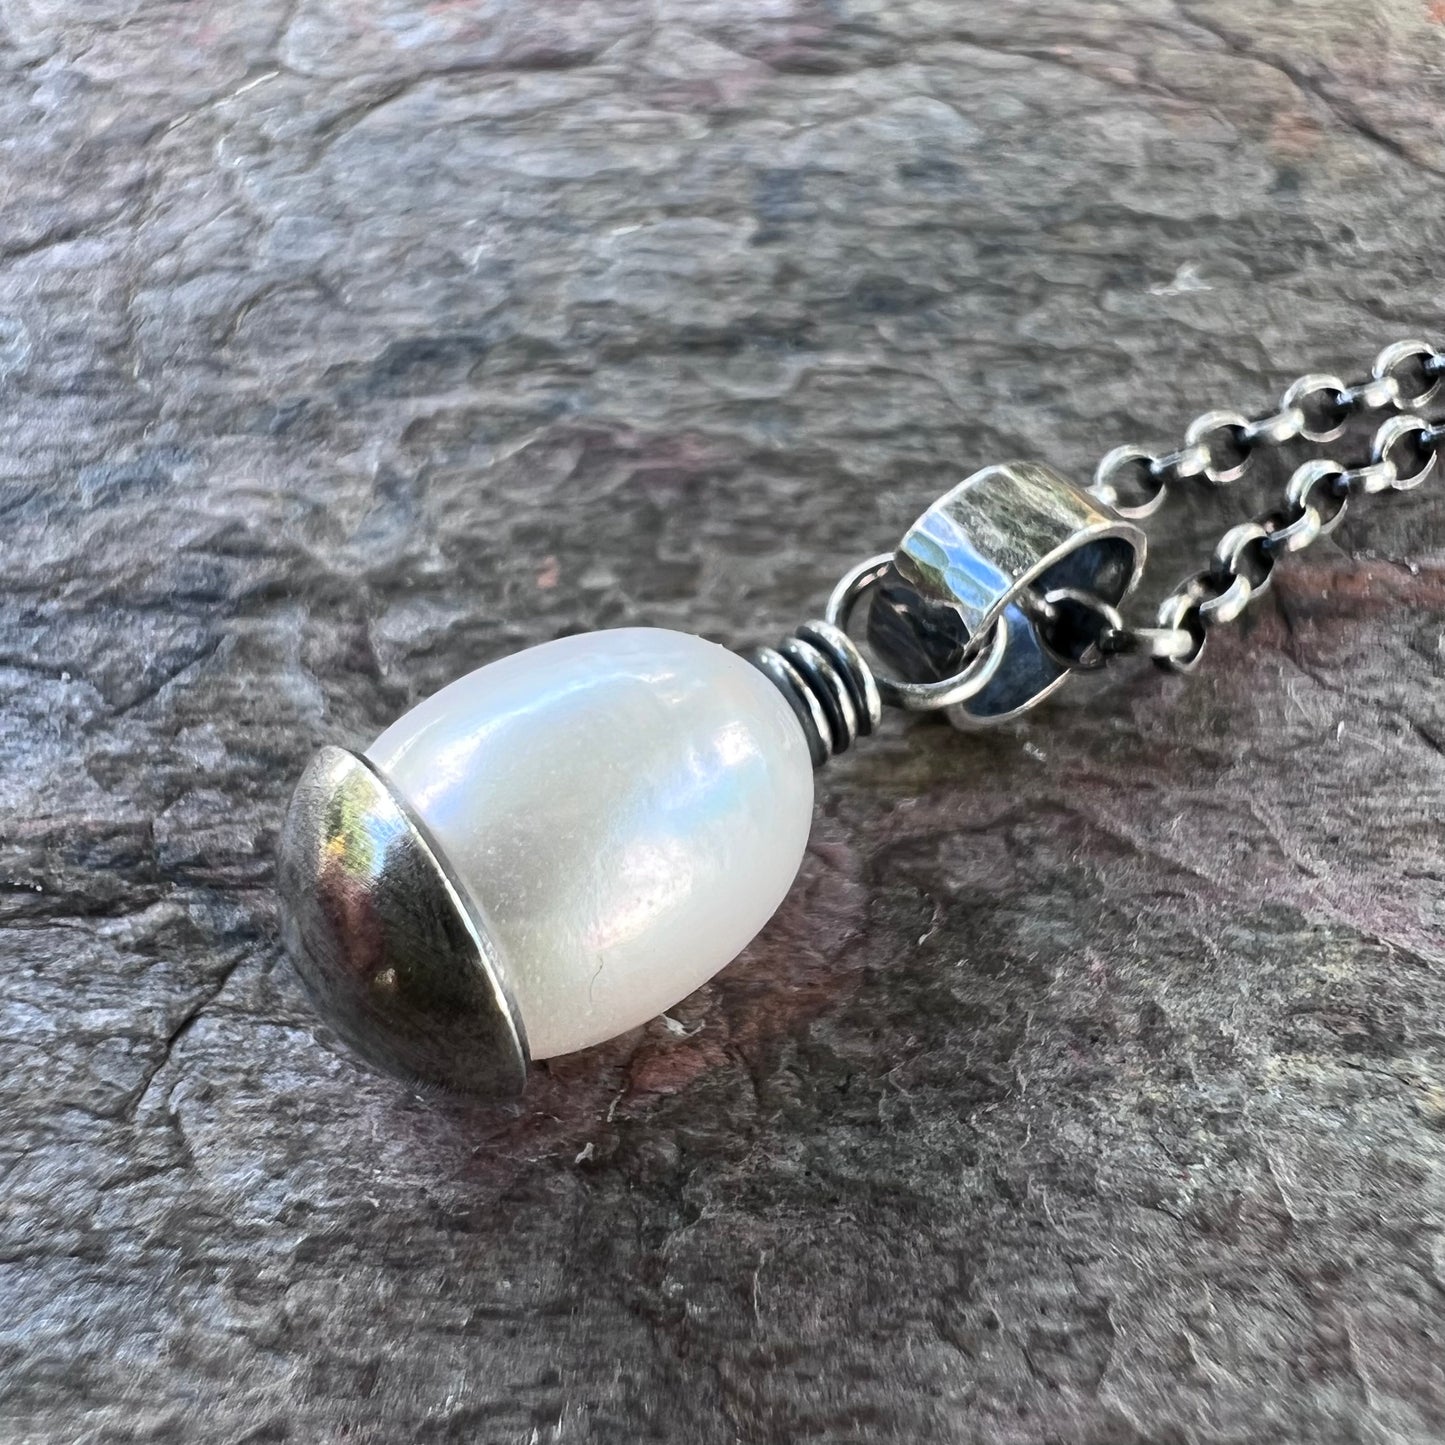 Sterling Silver Pearl Necklace - Genuine Freshwater Oval Pearl Pendant on Sterling Silver Chain